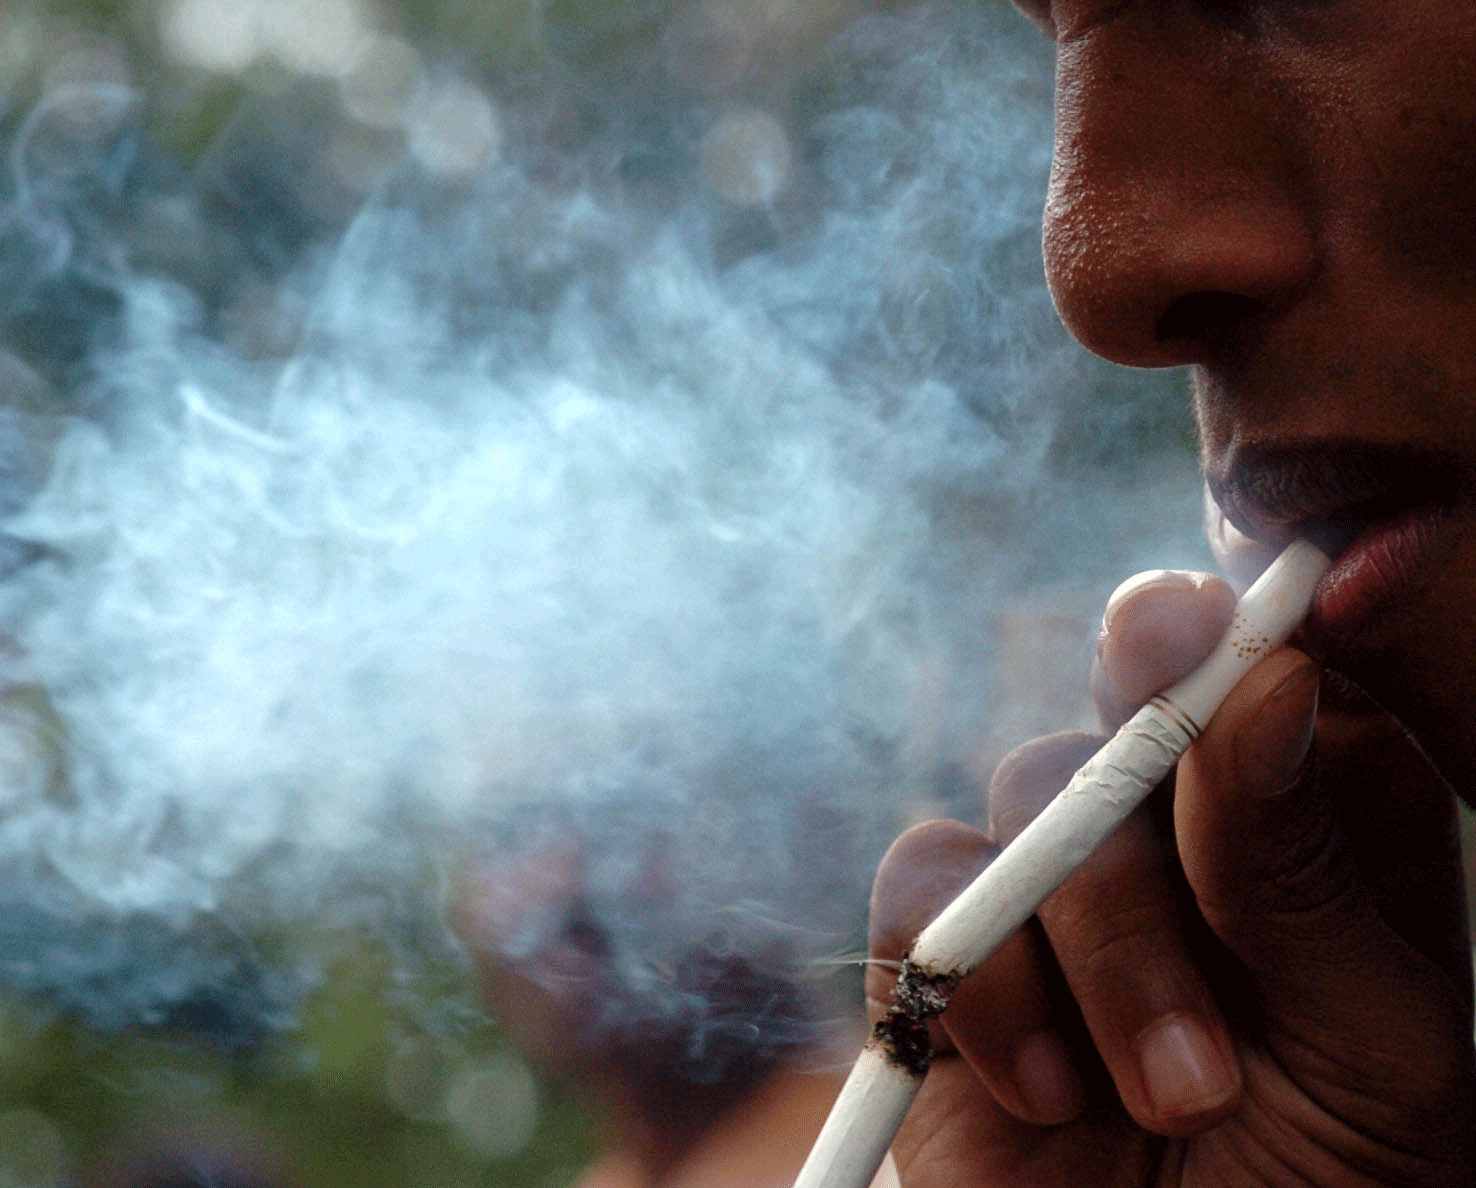 Secondhand cigarette smoke not only increases the risk of cardiovascular and metabolic problems, it may also lead to gain weight, a new study has warned.